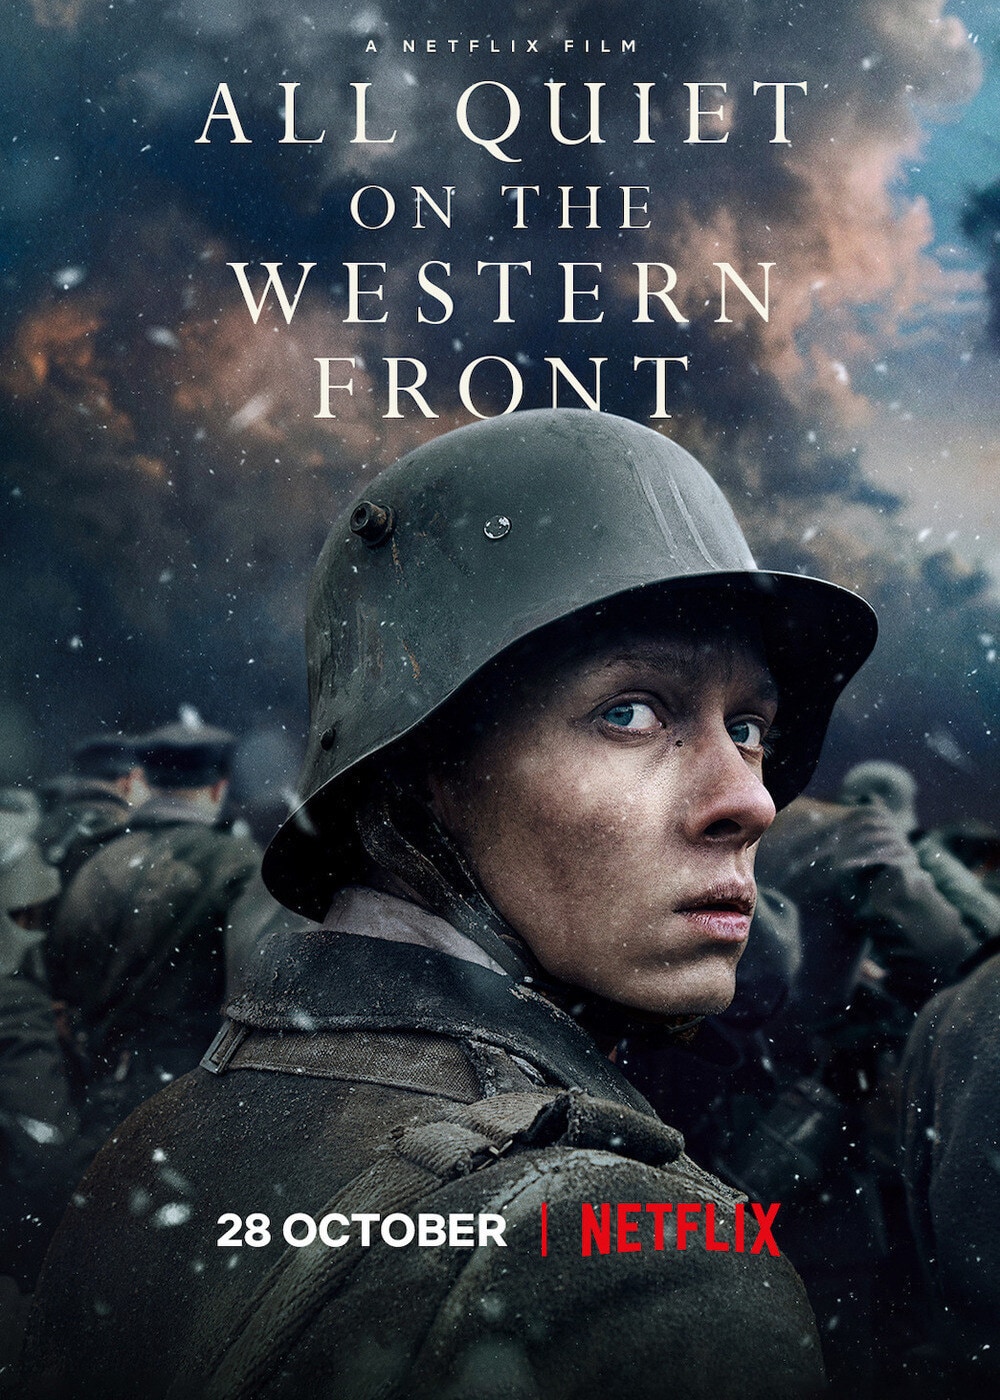 All Quiet on the Western Front (2022) 720p NF HDRip Hollywood Movie ORG. [Dual Audio] x264 MSubs Download